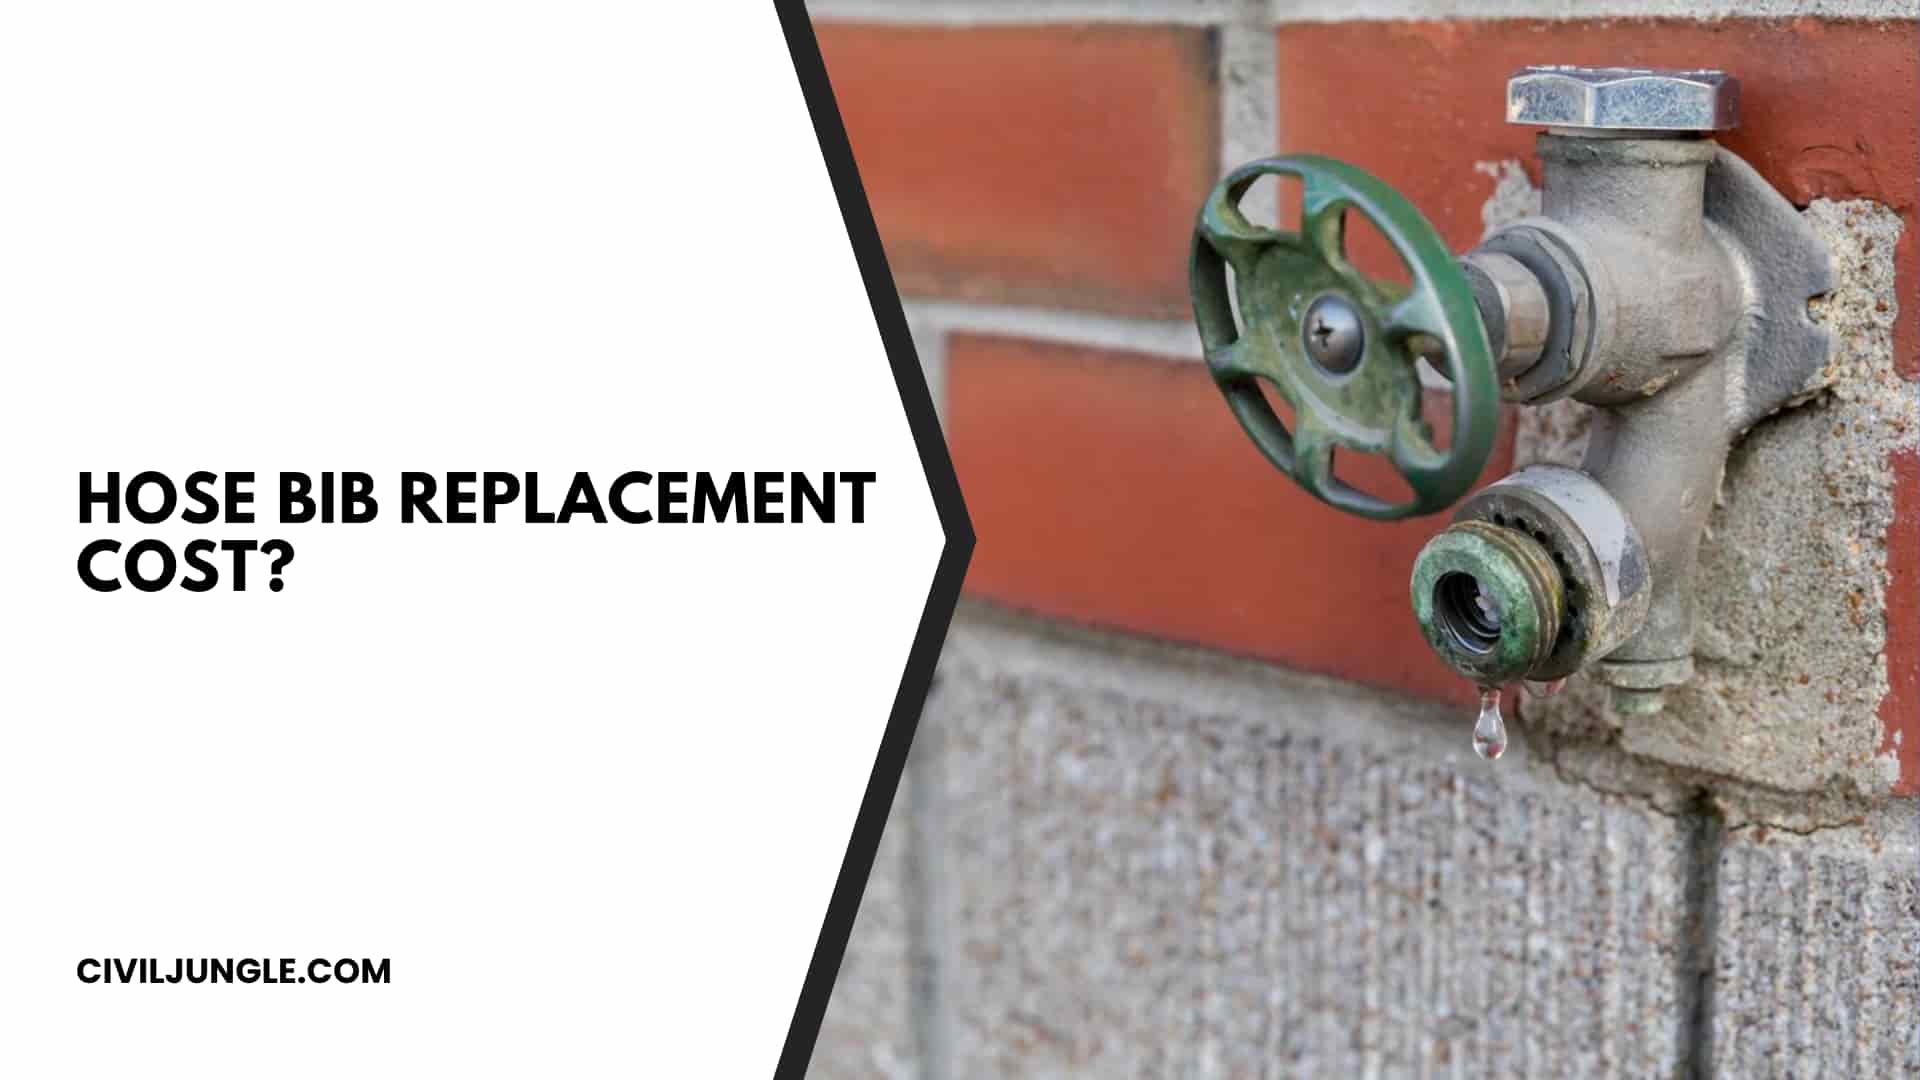 Hose Bib Replacement Cost?